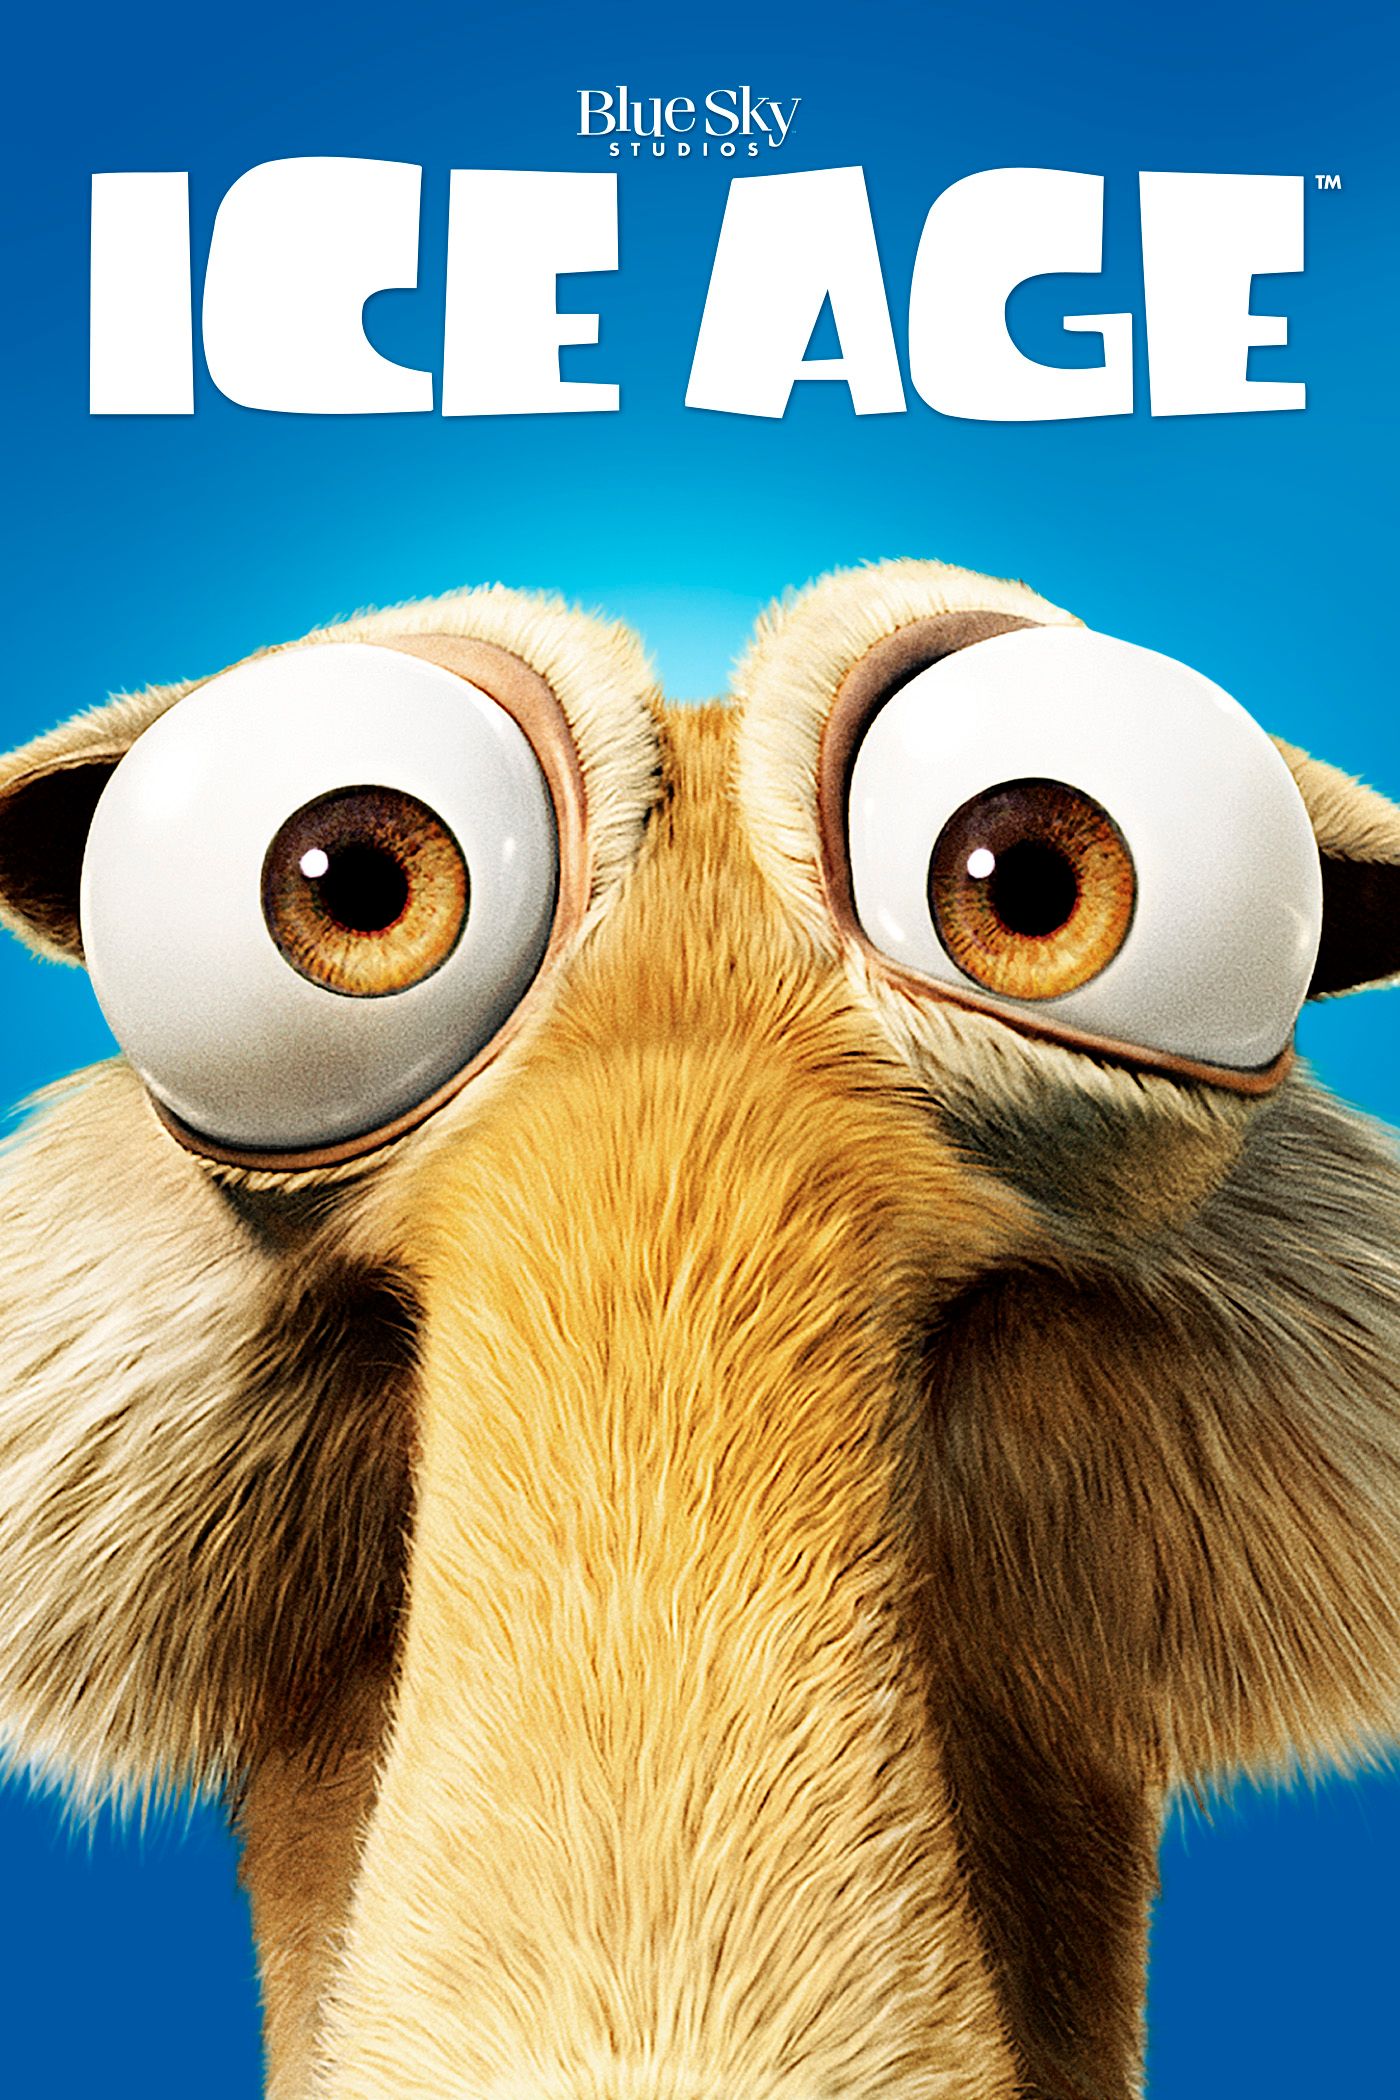 Ice age movie series free download how to download and install windows 10 for free